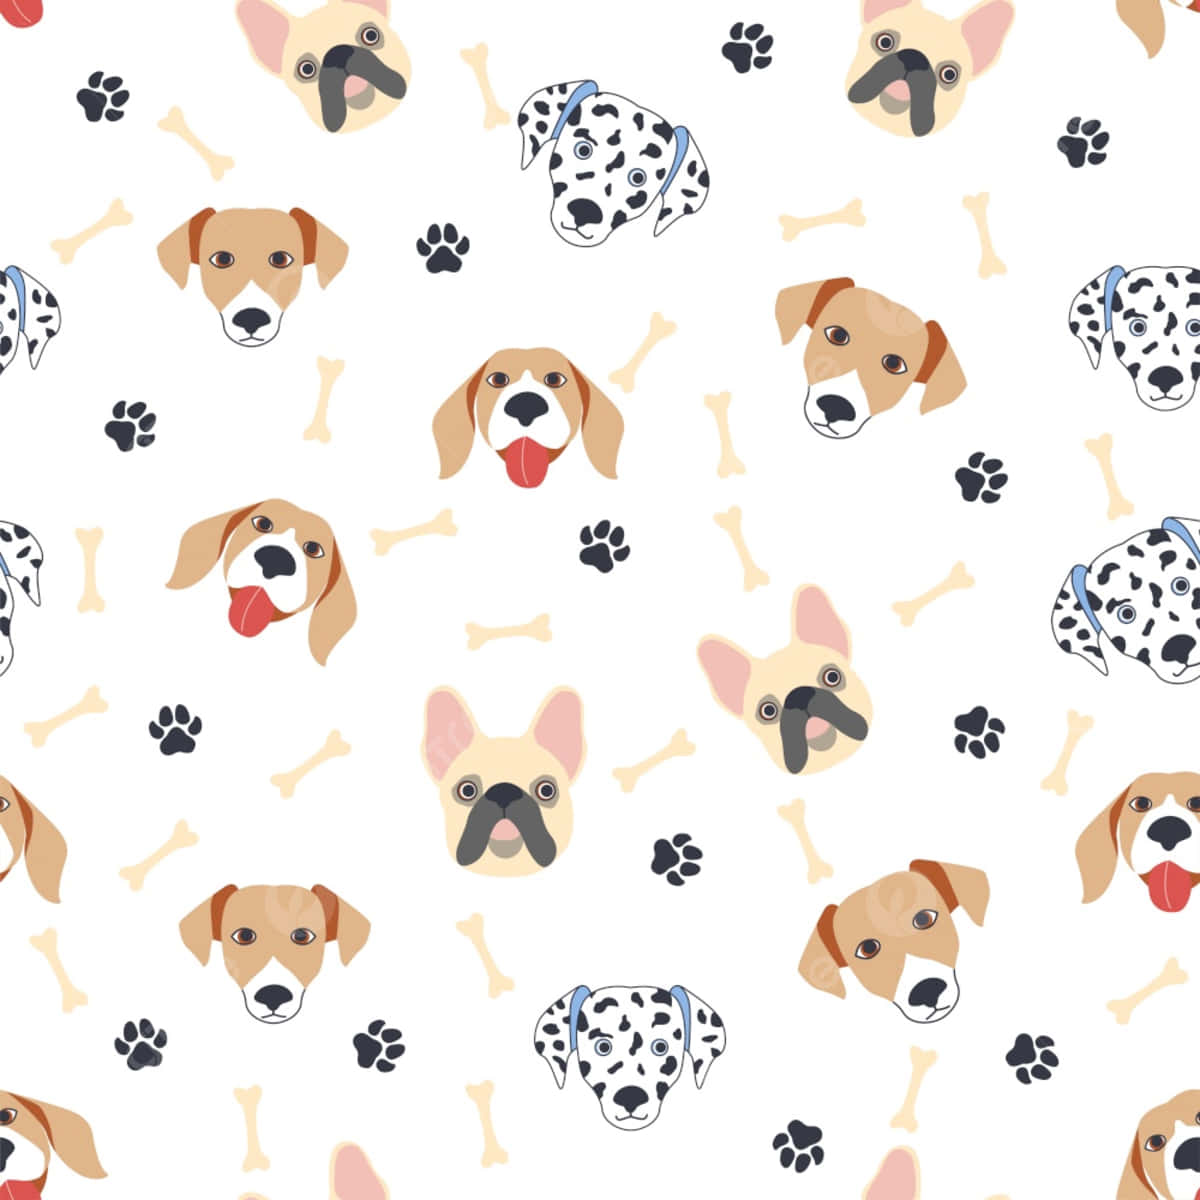 A Pattern Of Dogs With Bones And Bones Wallpaper